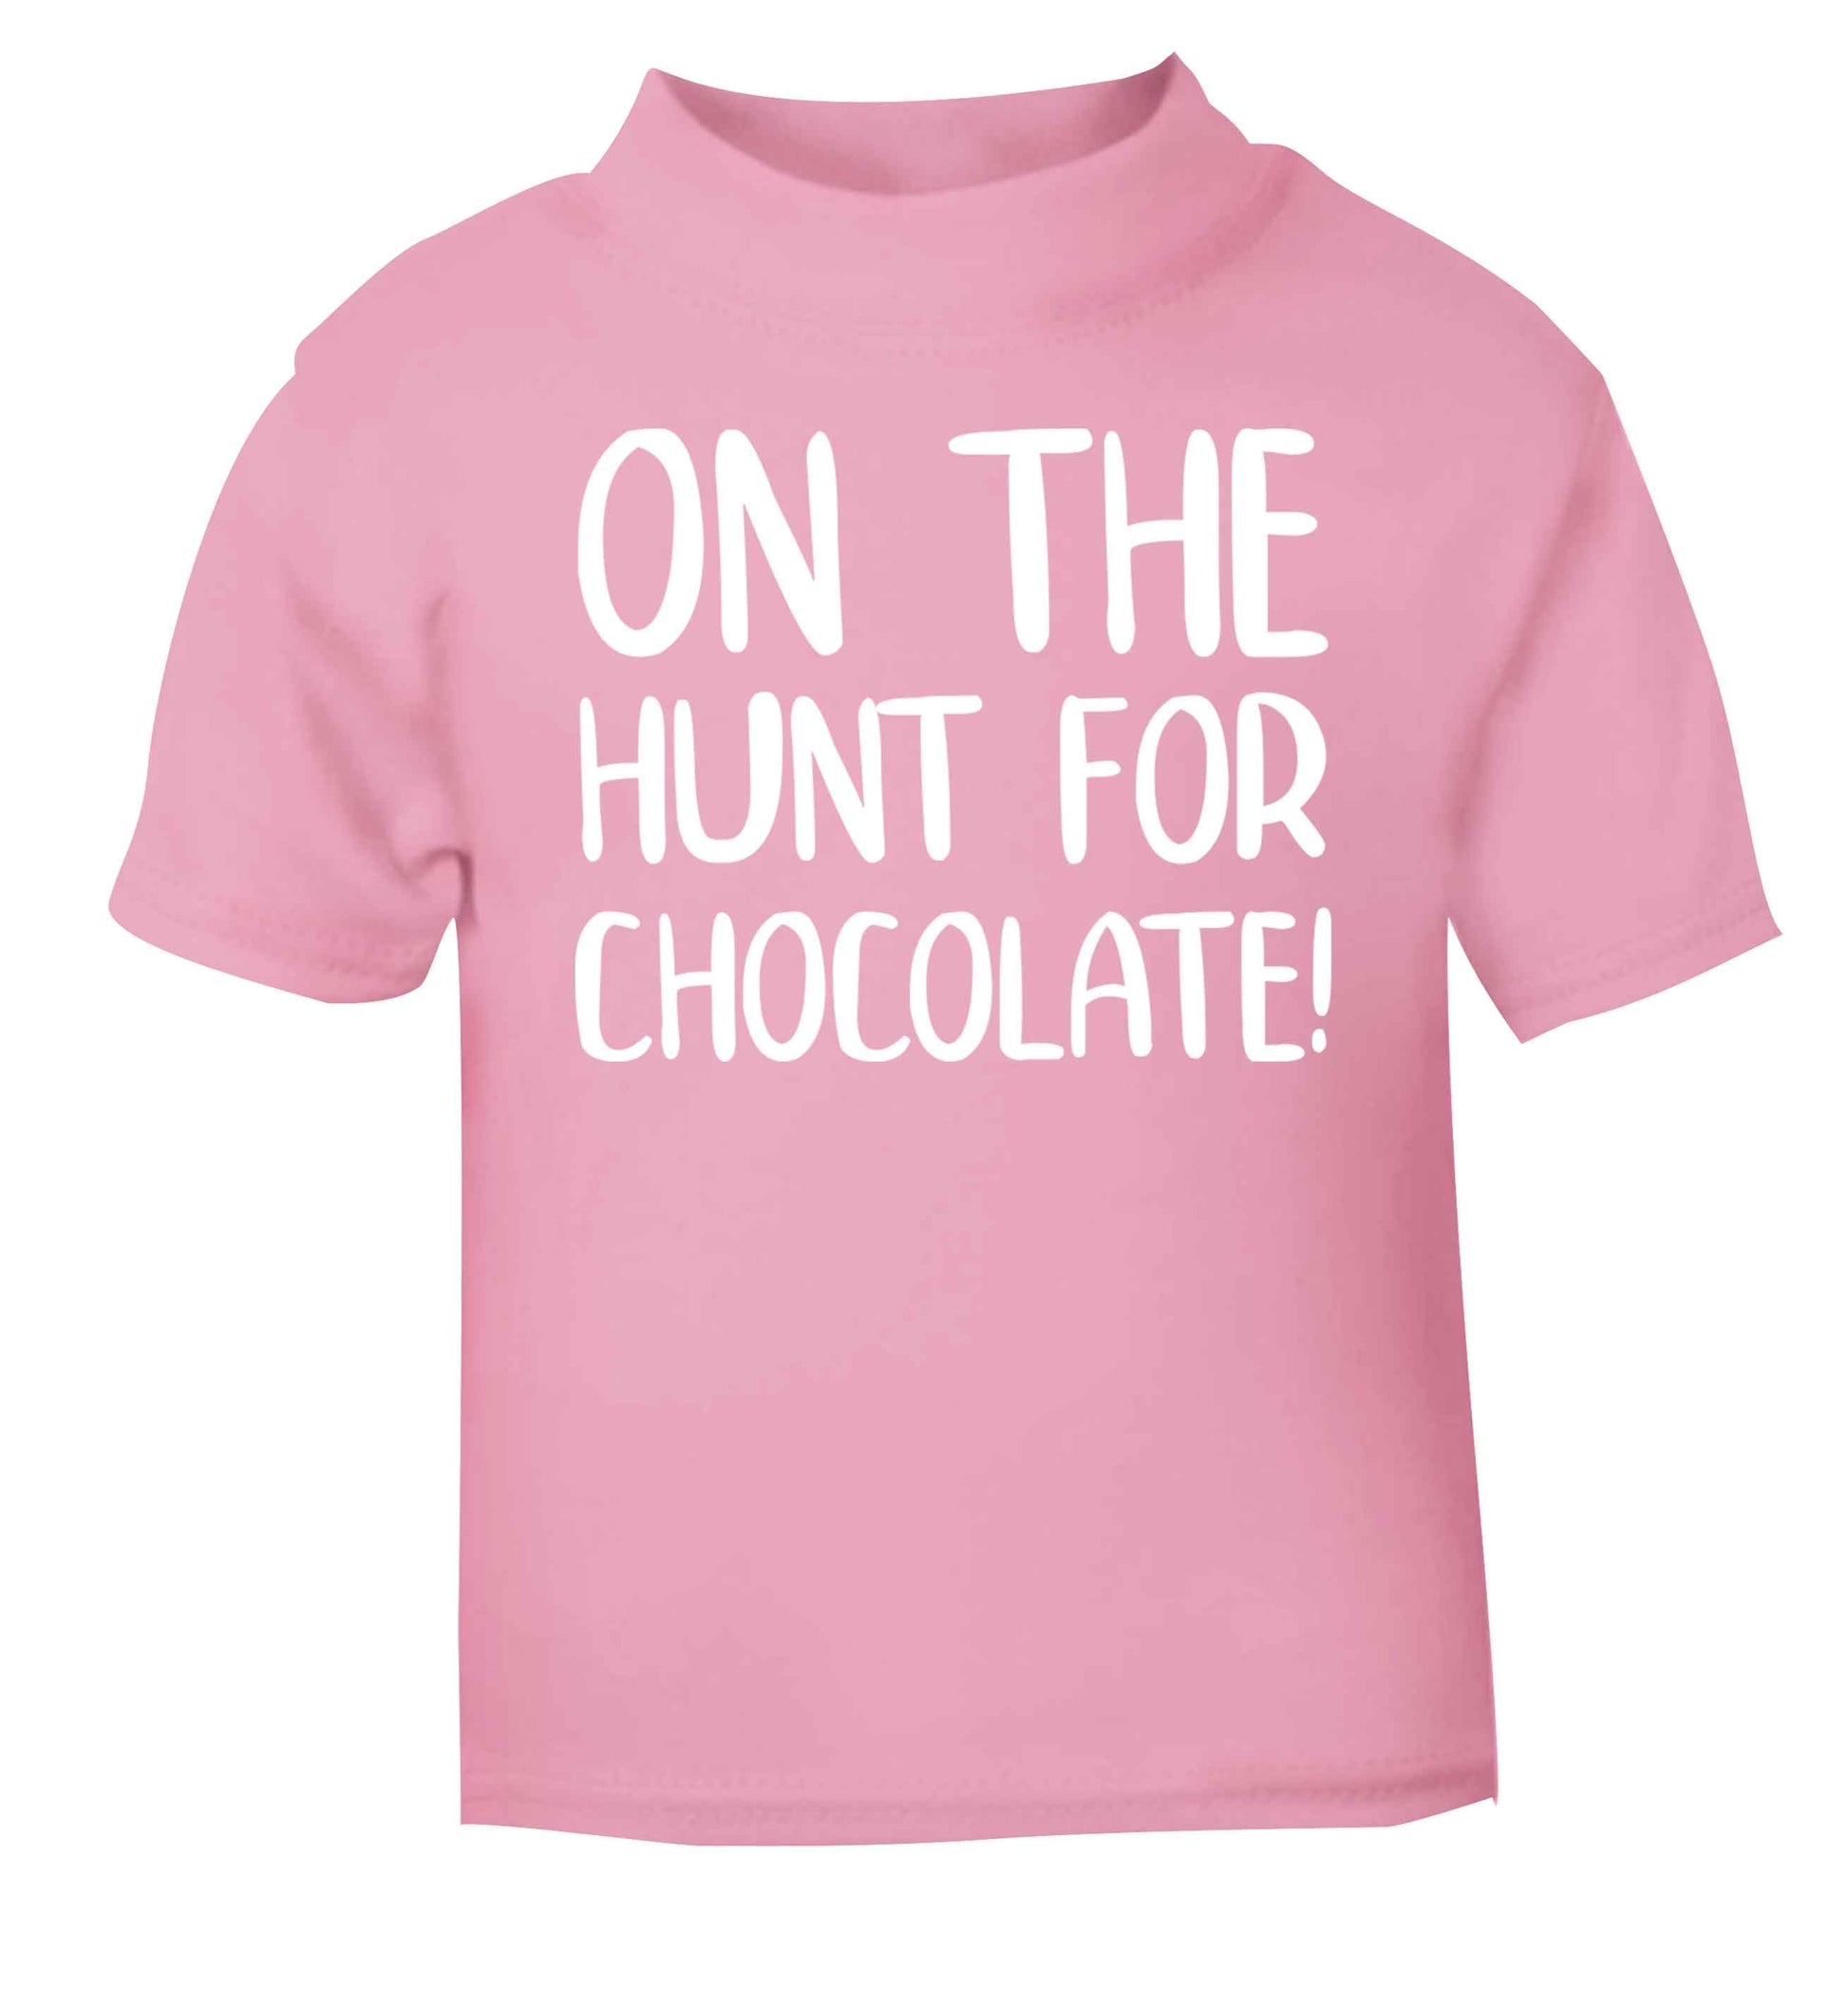 On the hunt for chocolate! light pink baby toddler Tshirt 2 Years